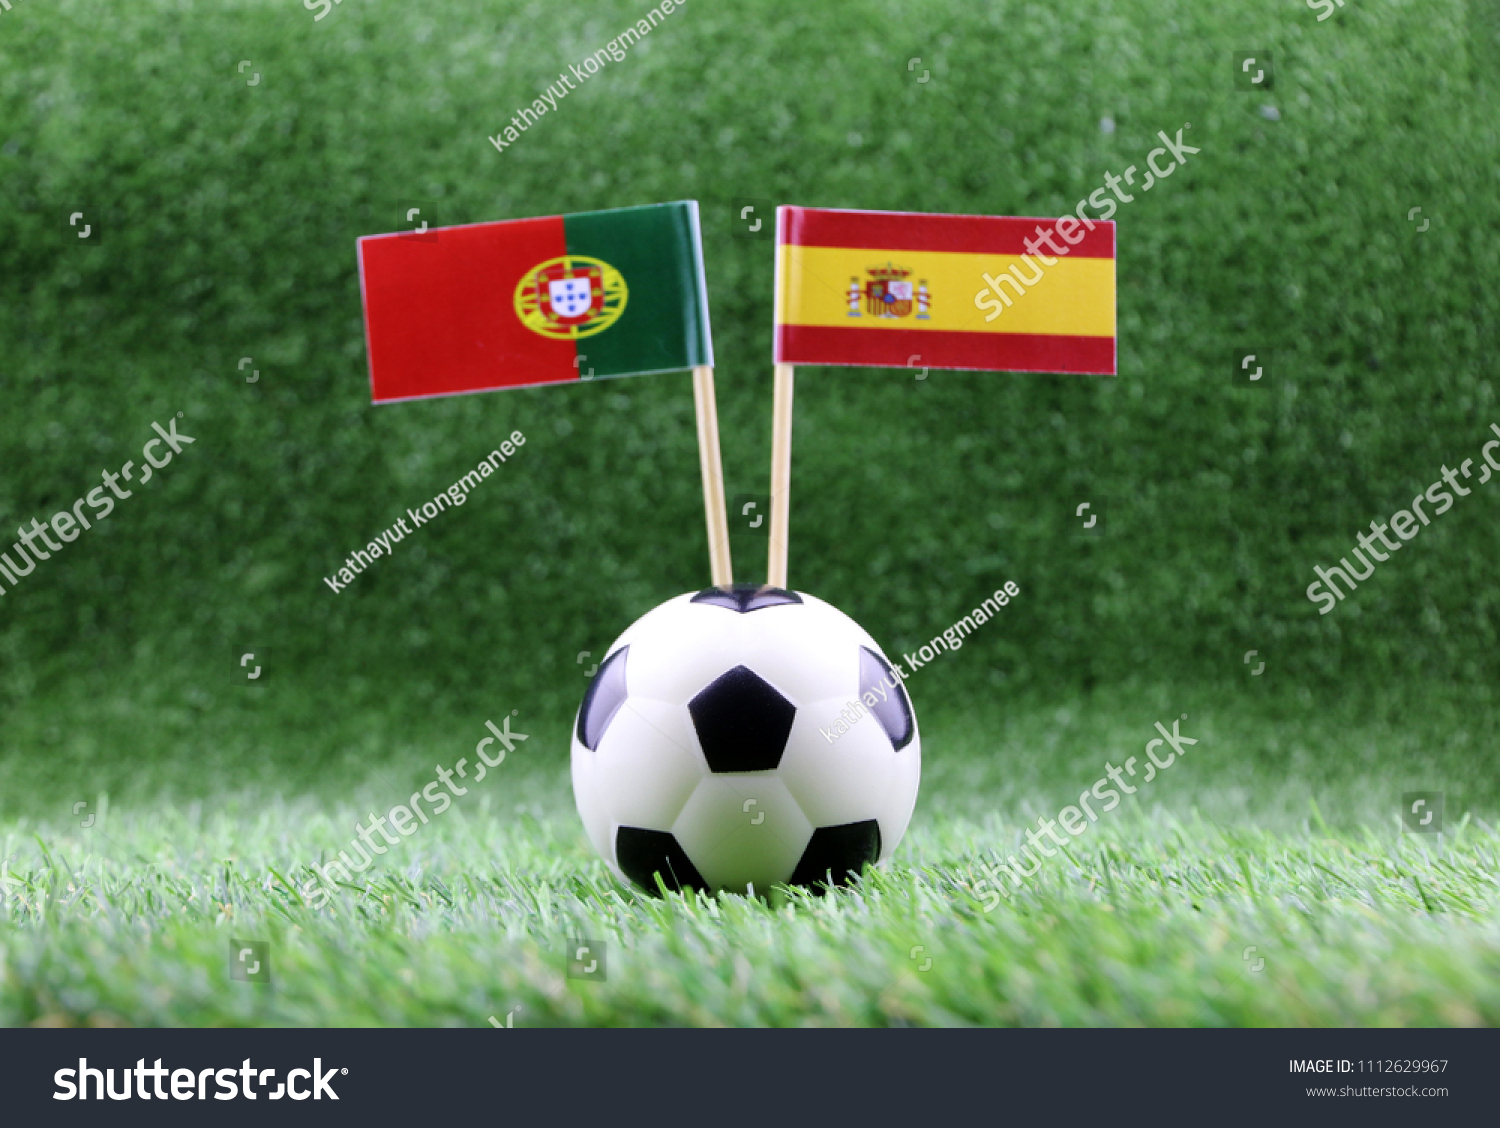 ball with Spain VS Portugal flag match on Green grass football 2018 #1112629967